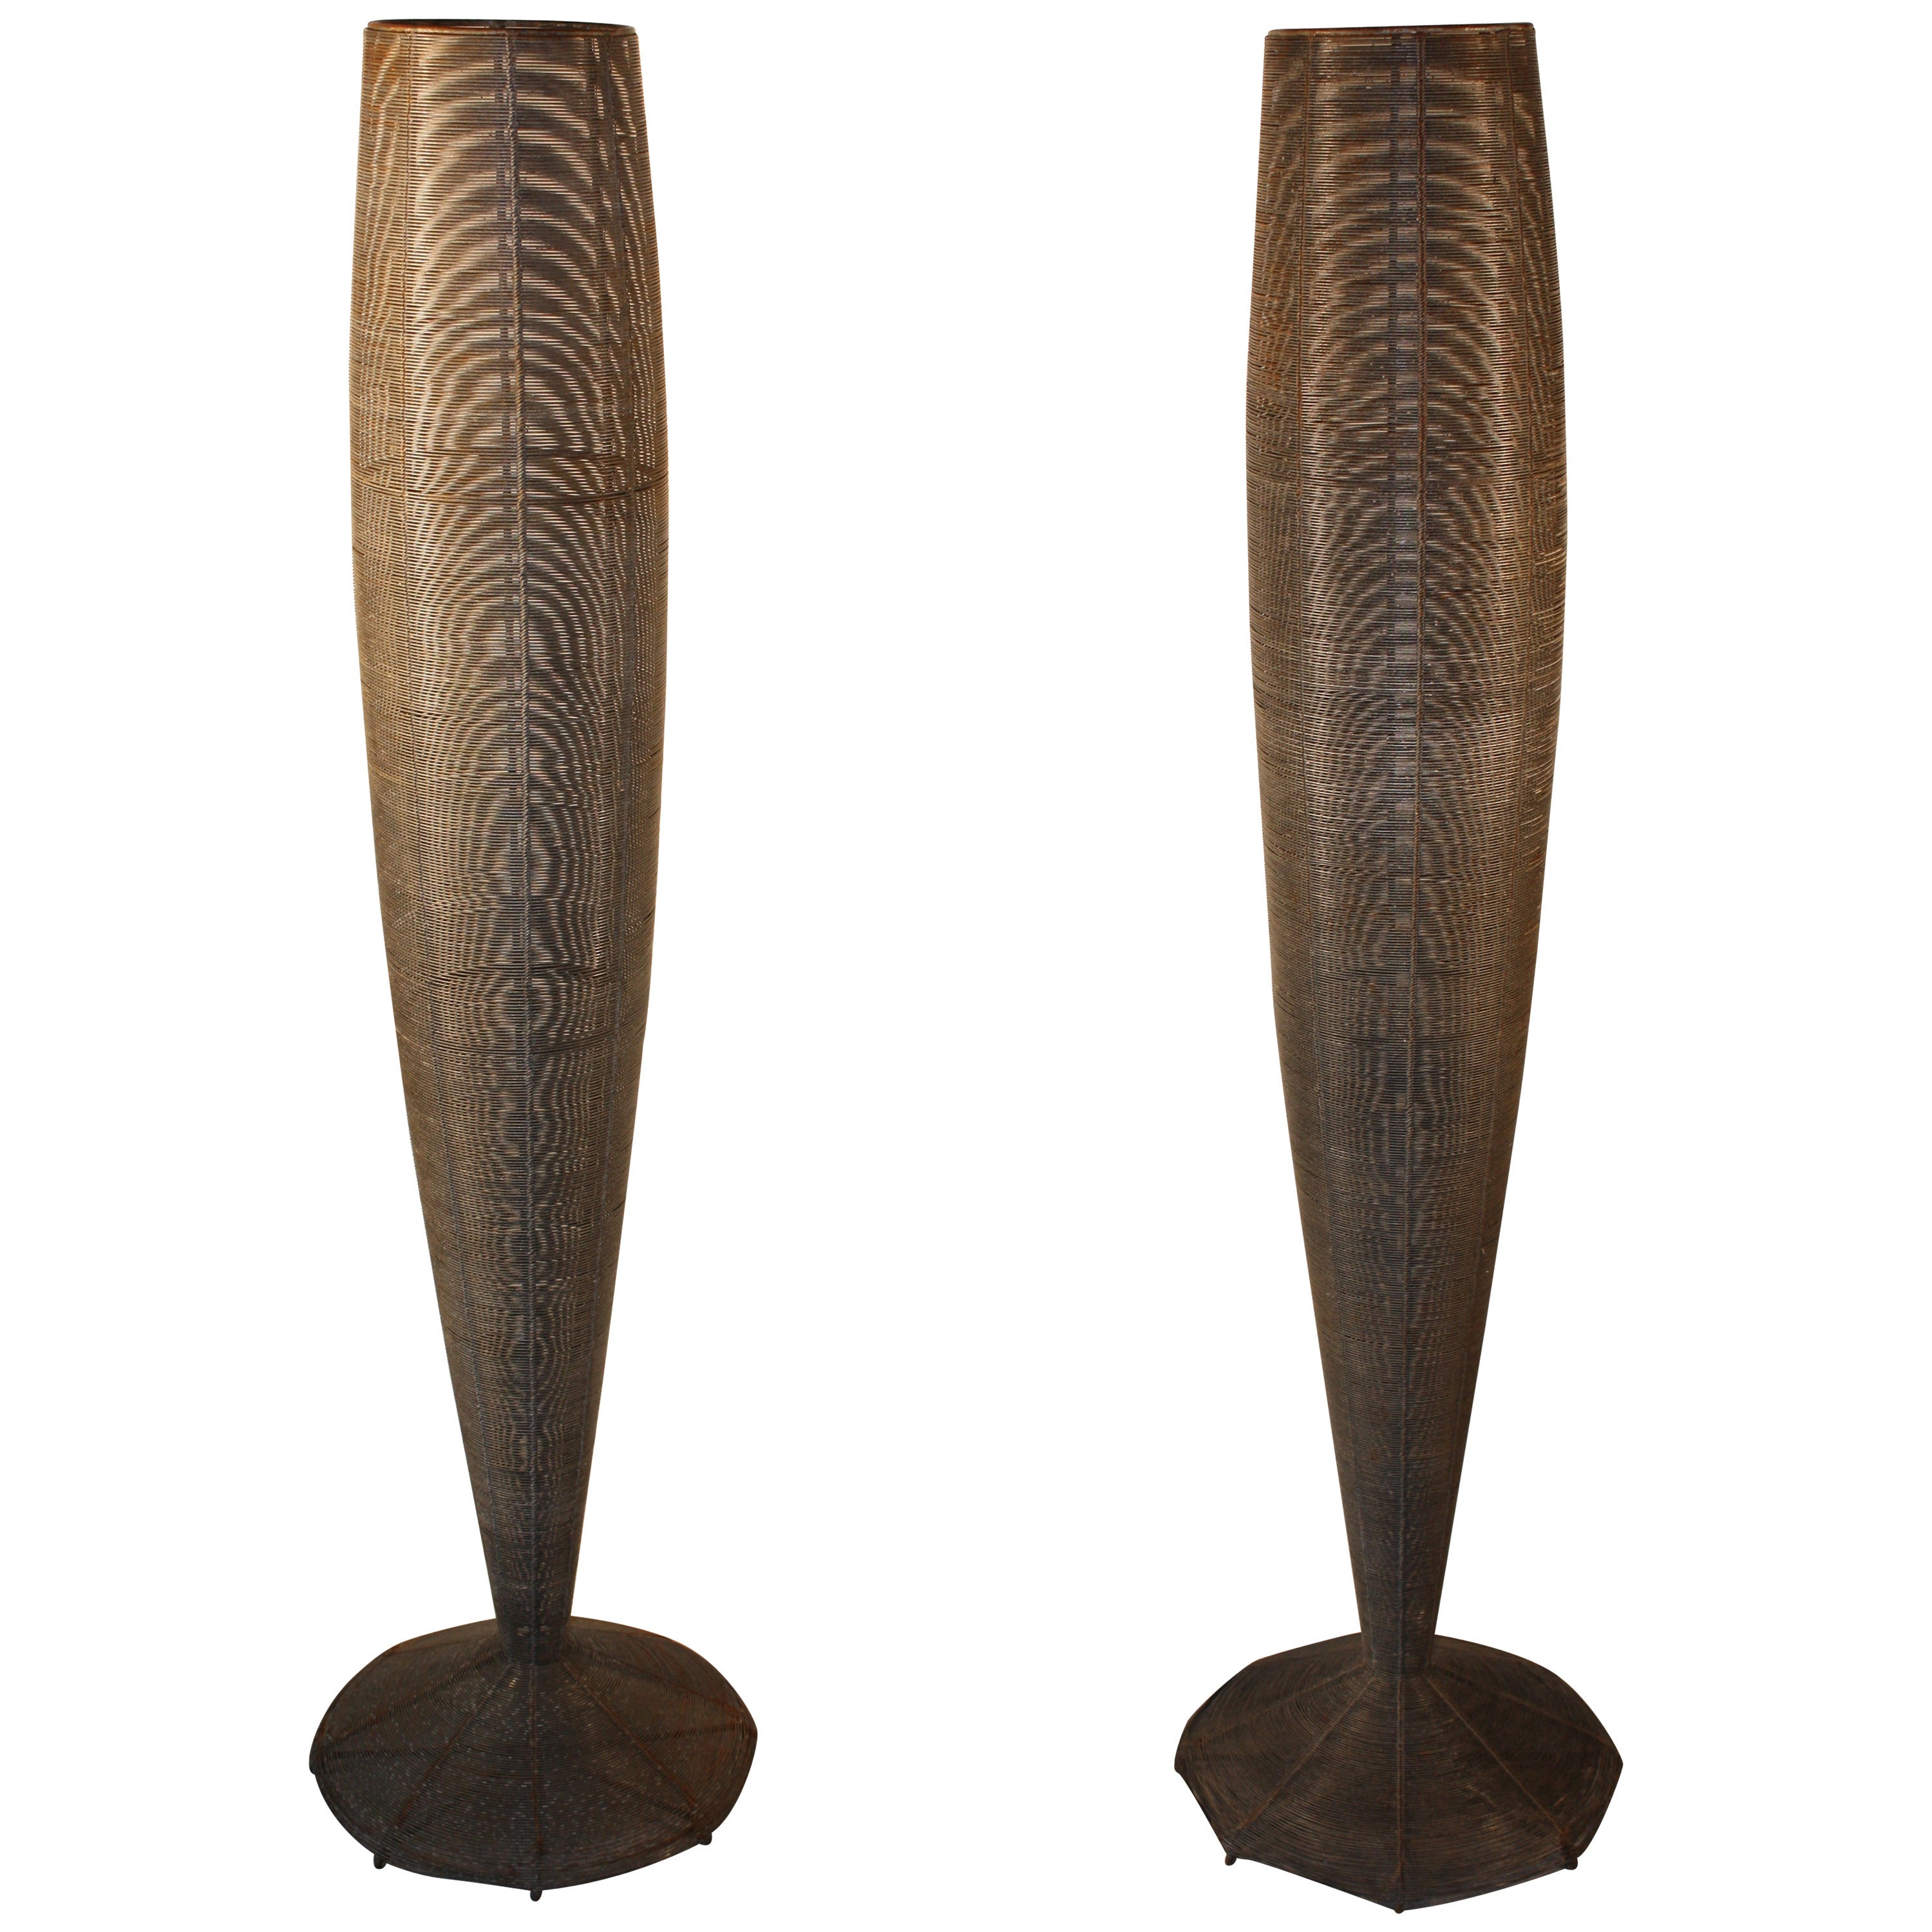 A Pair Of 5' Tall Modernist Vases In Woven Wire